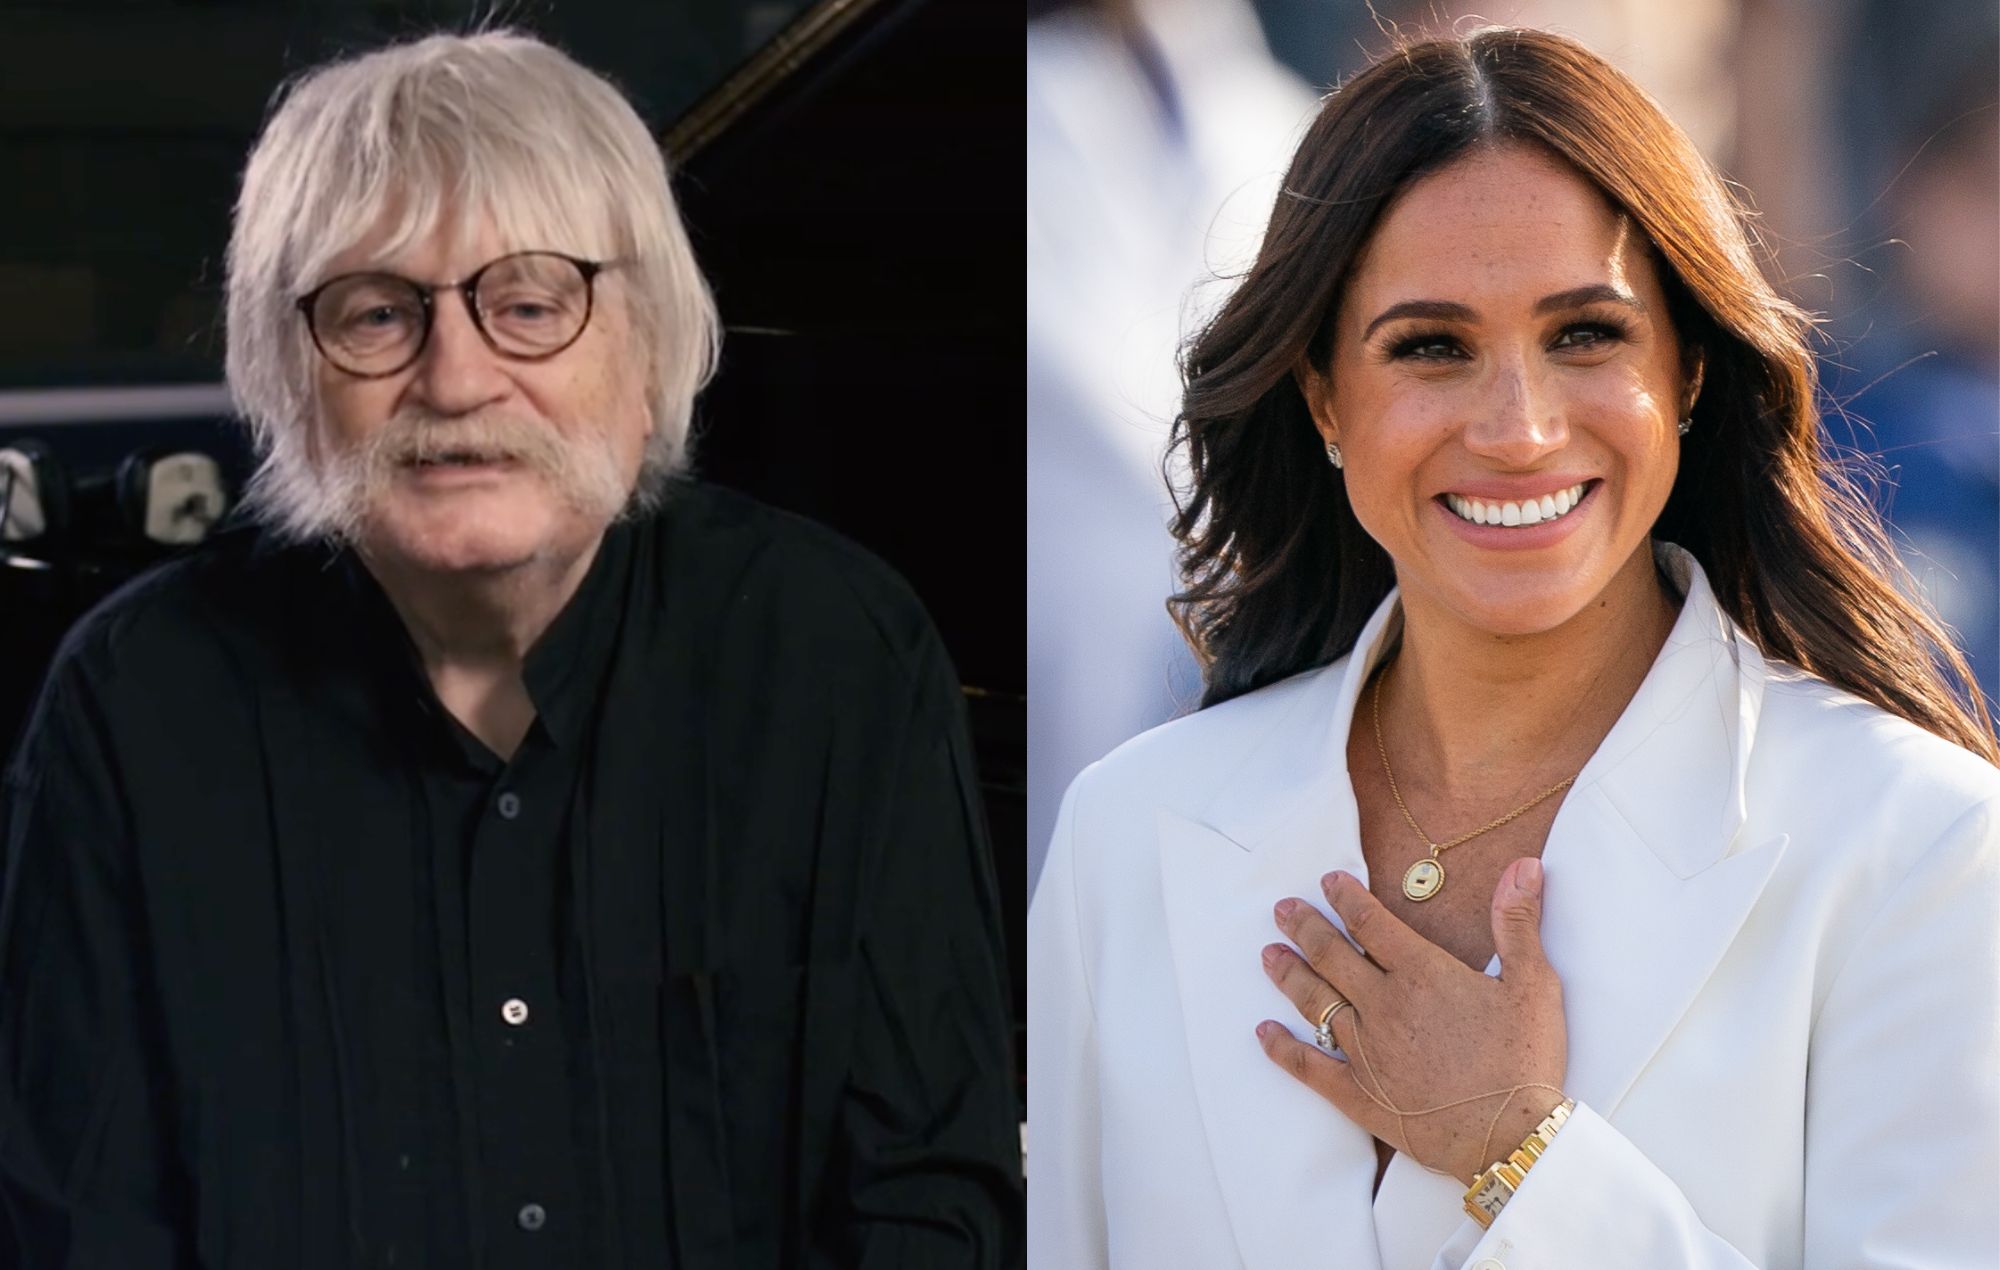 Soft Machine’s Sir Karl Jenkins responds to claims he is Meghan Markle in disguise